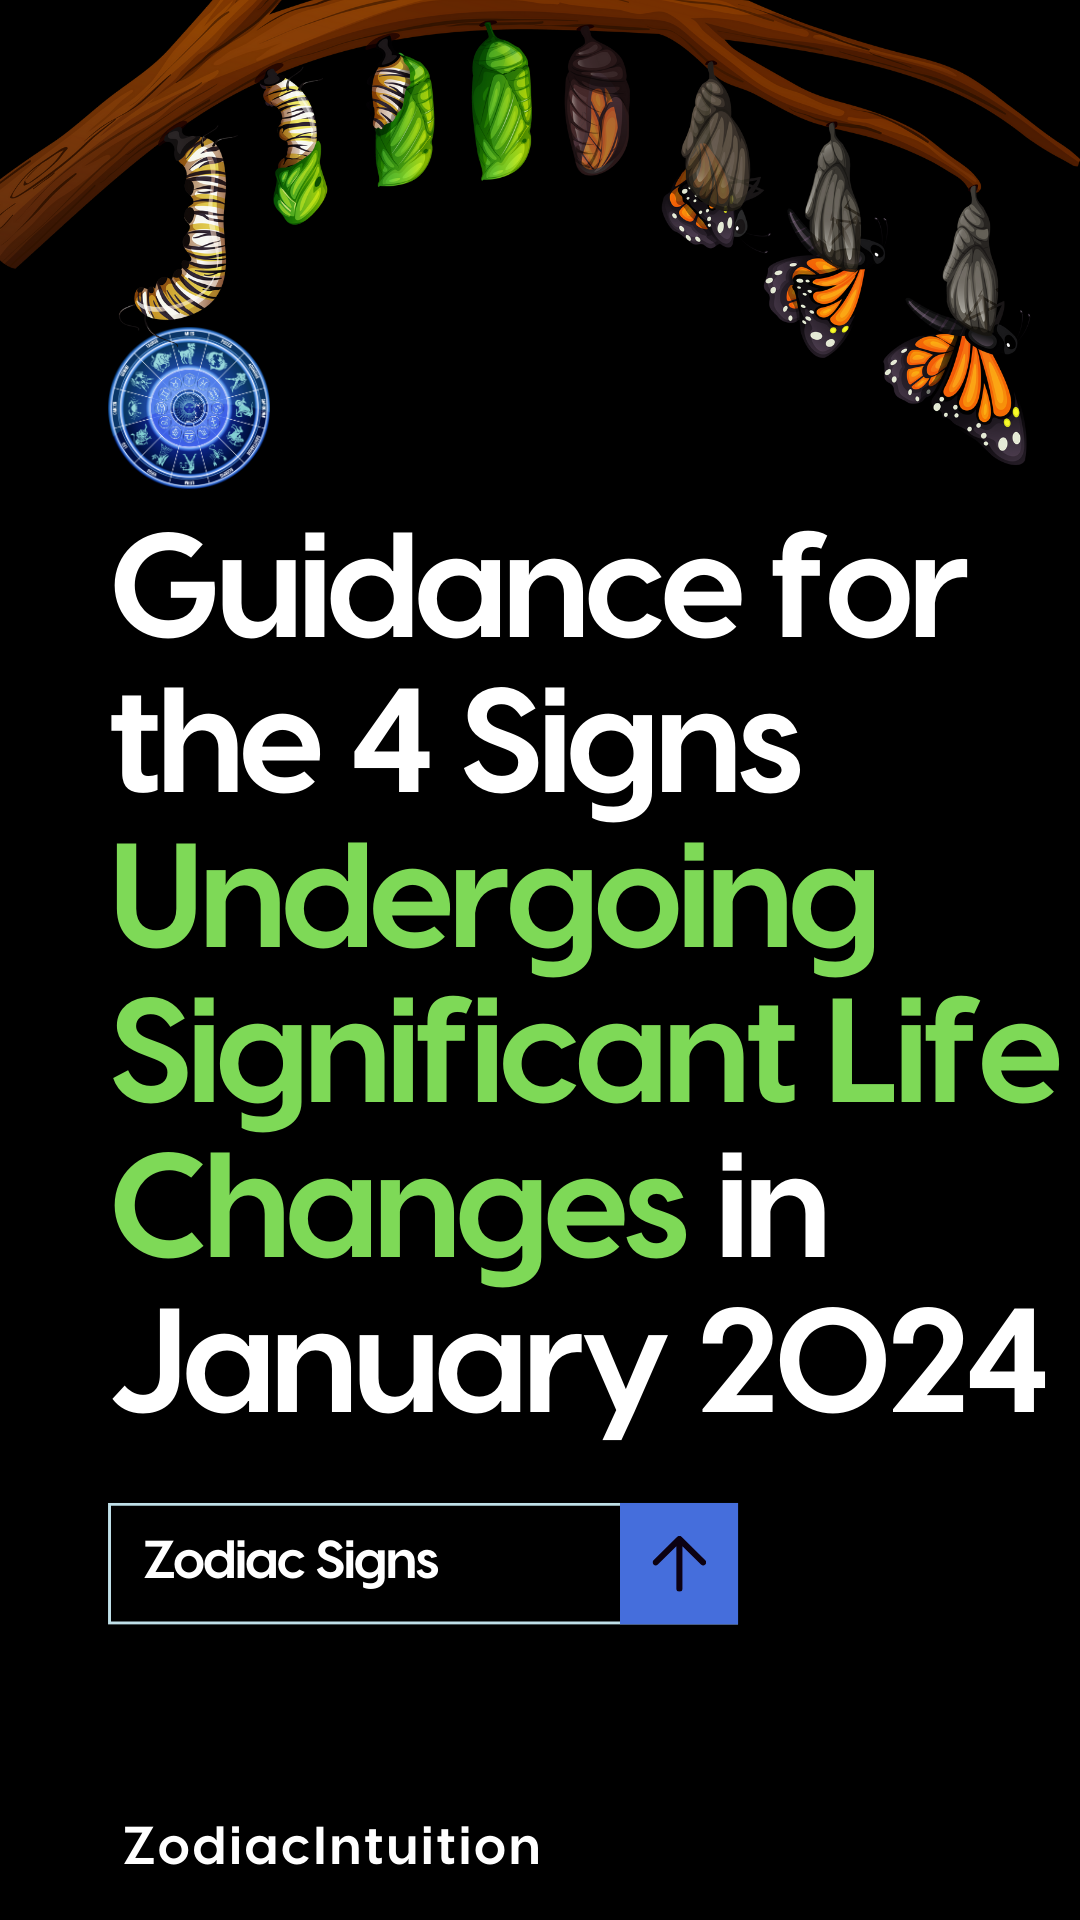 Guidance for the 4 Signs Undergoing Significant Life Changes in January 2024